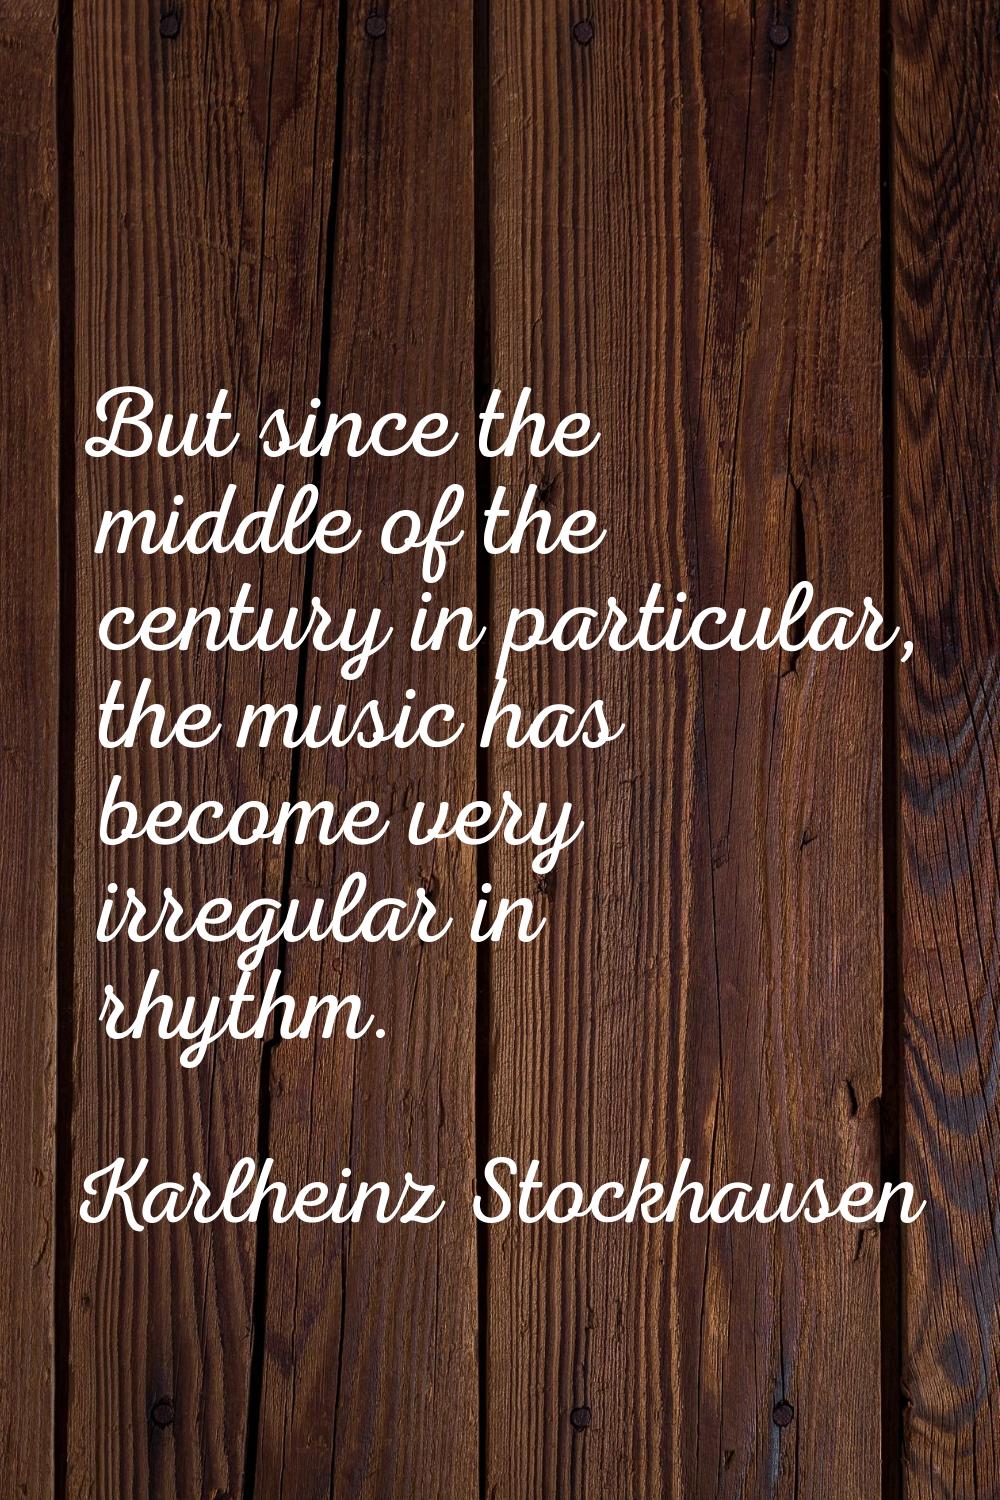 But since the middle of the century in particular, the music has become very irregular in rhythm.